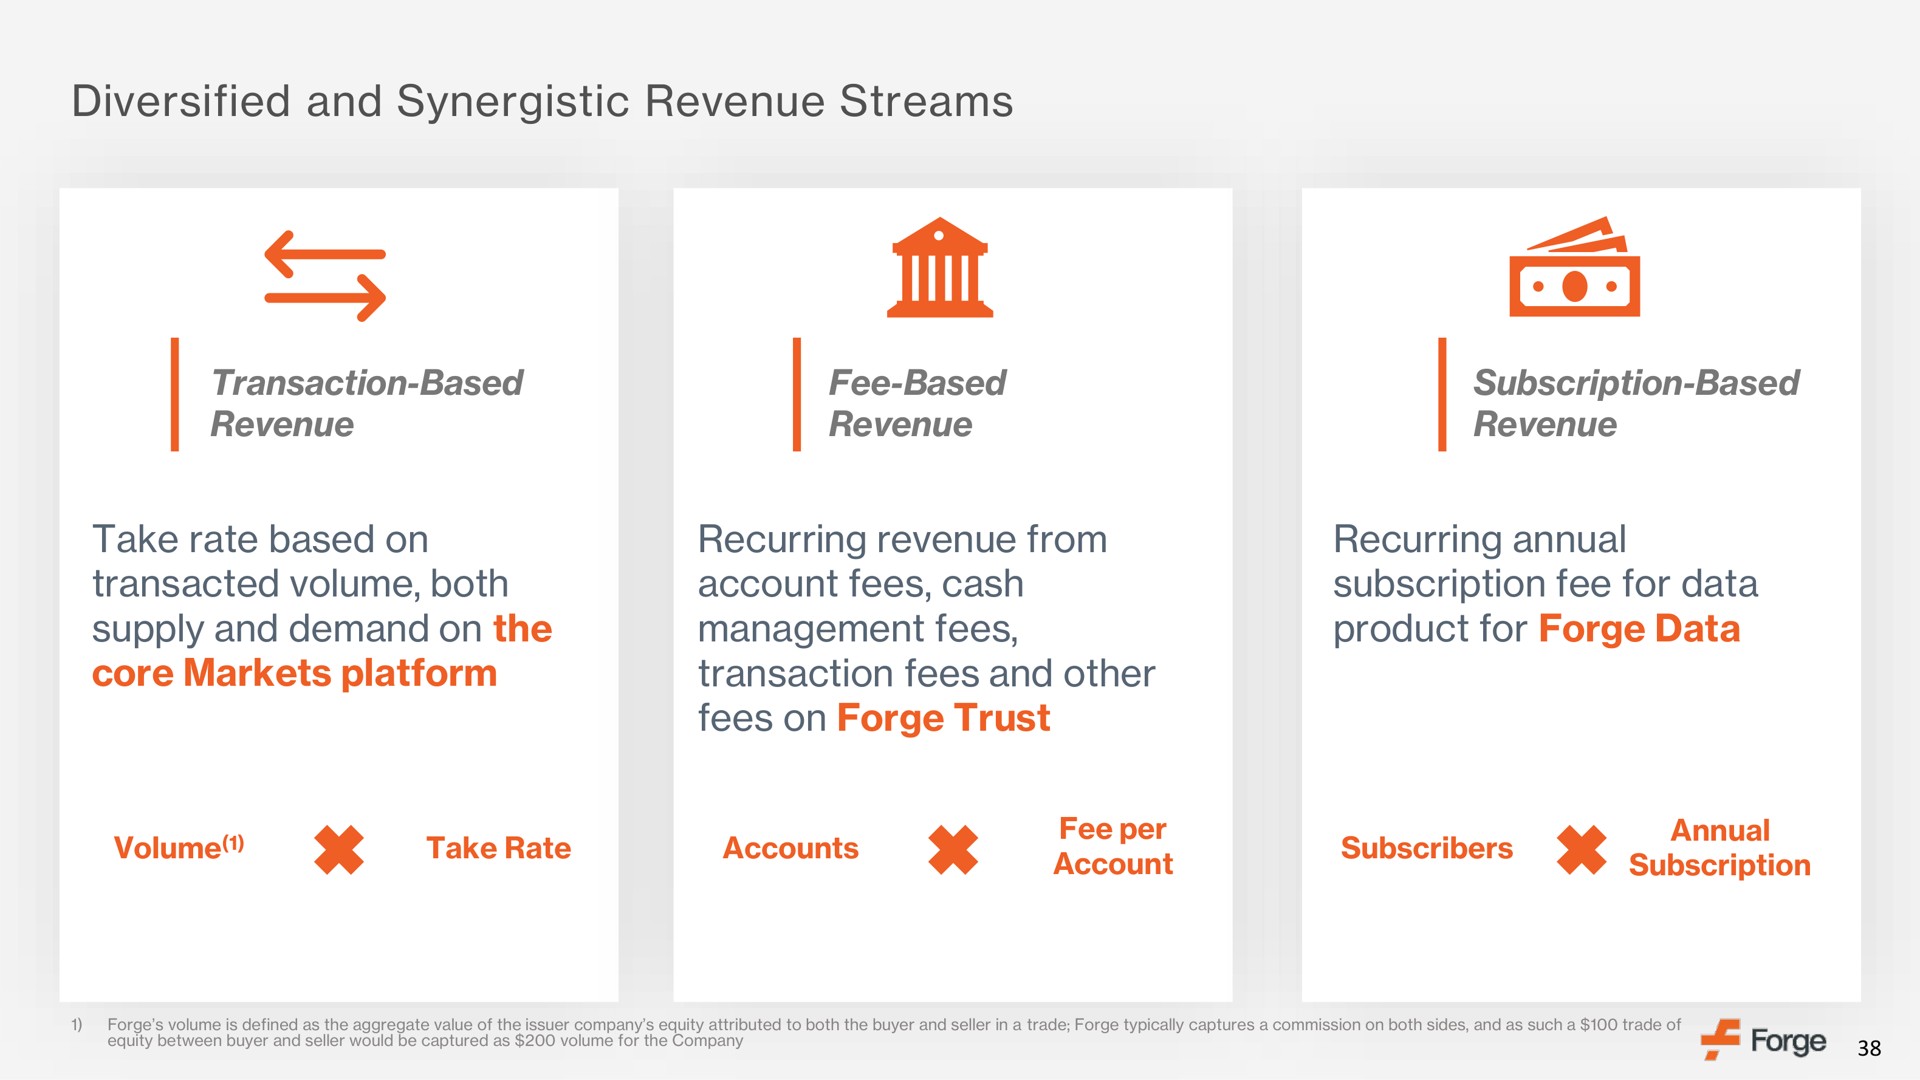 diversified and synergistic revenue streams transaction based revenue fee based revenue subscription based revenue take rate based on transacted volume both supply and demand on the core markets platform recurring revenue from account fees cash management fees transaction fees and other fees on forge trust recurring annual subscription fee for data product for forge data a accounts | Forge